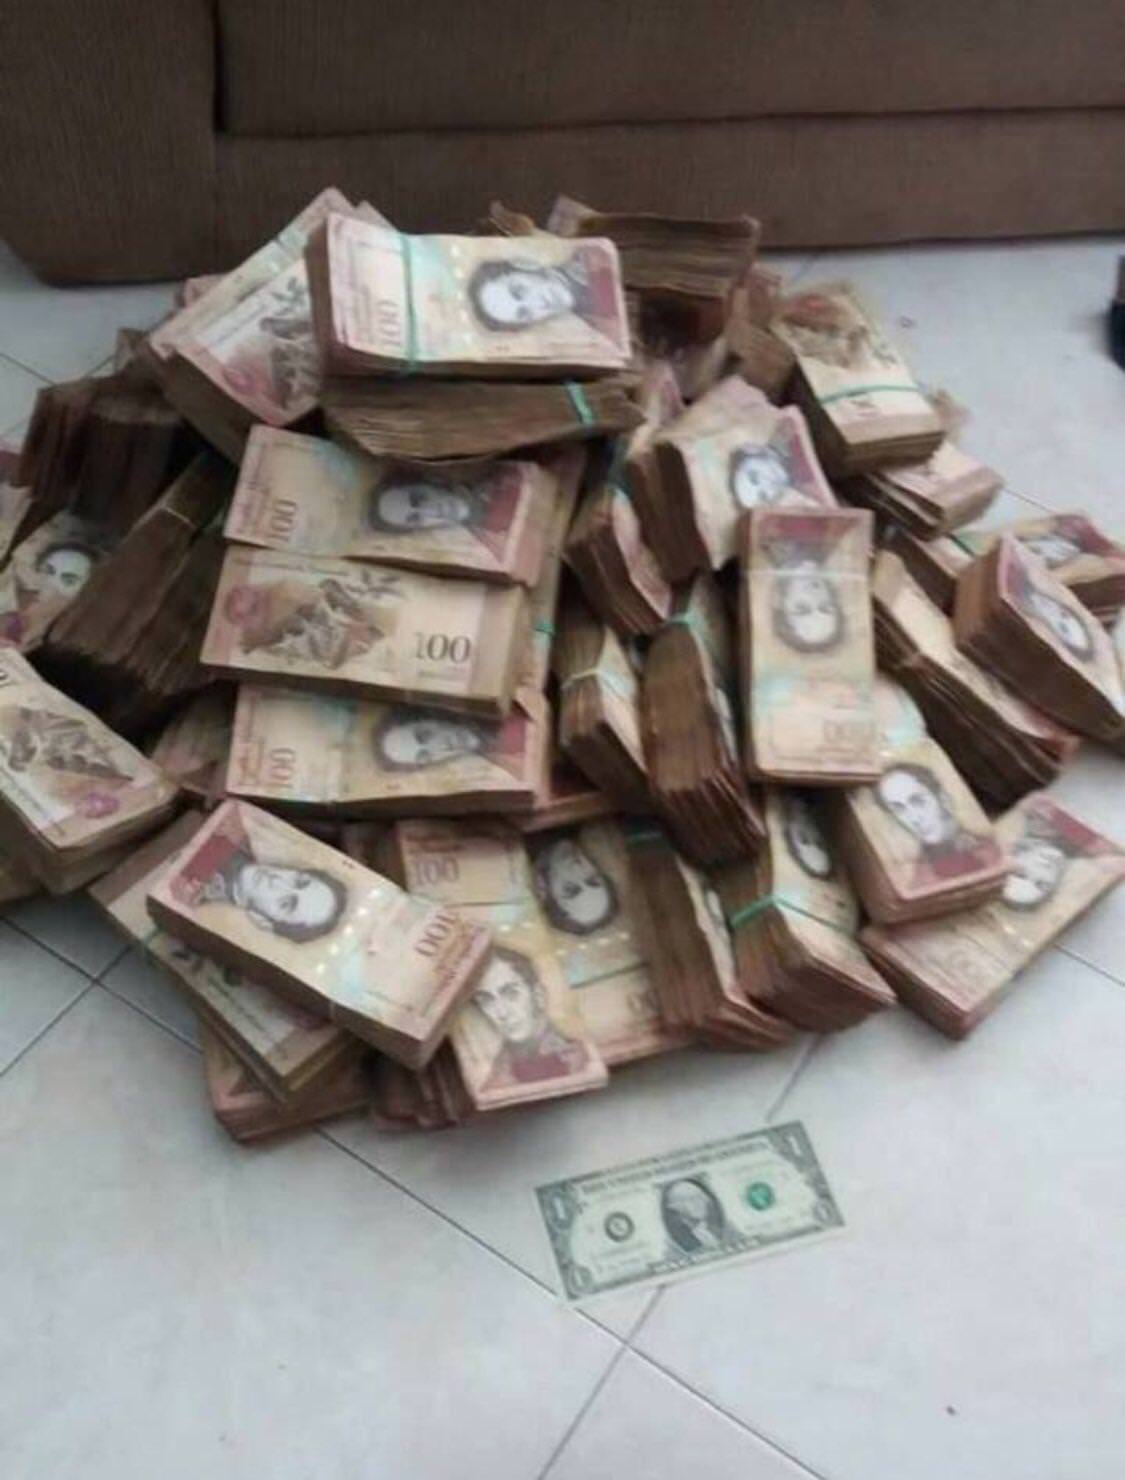 This pile of cash is the Venezuelan equivalent of one US dollar.